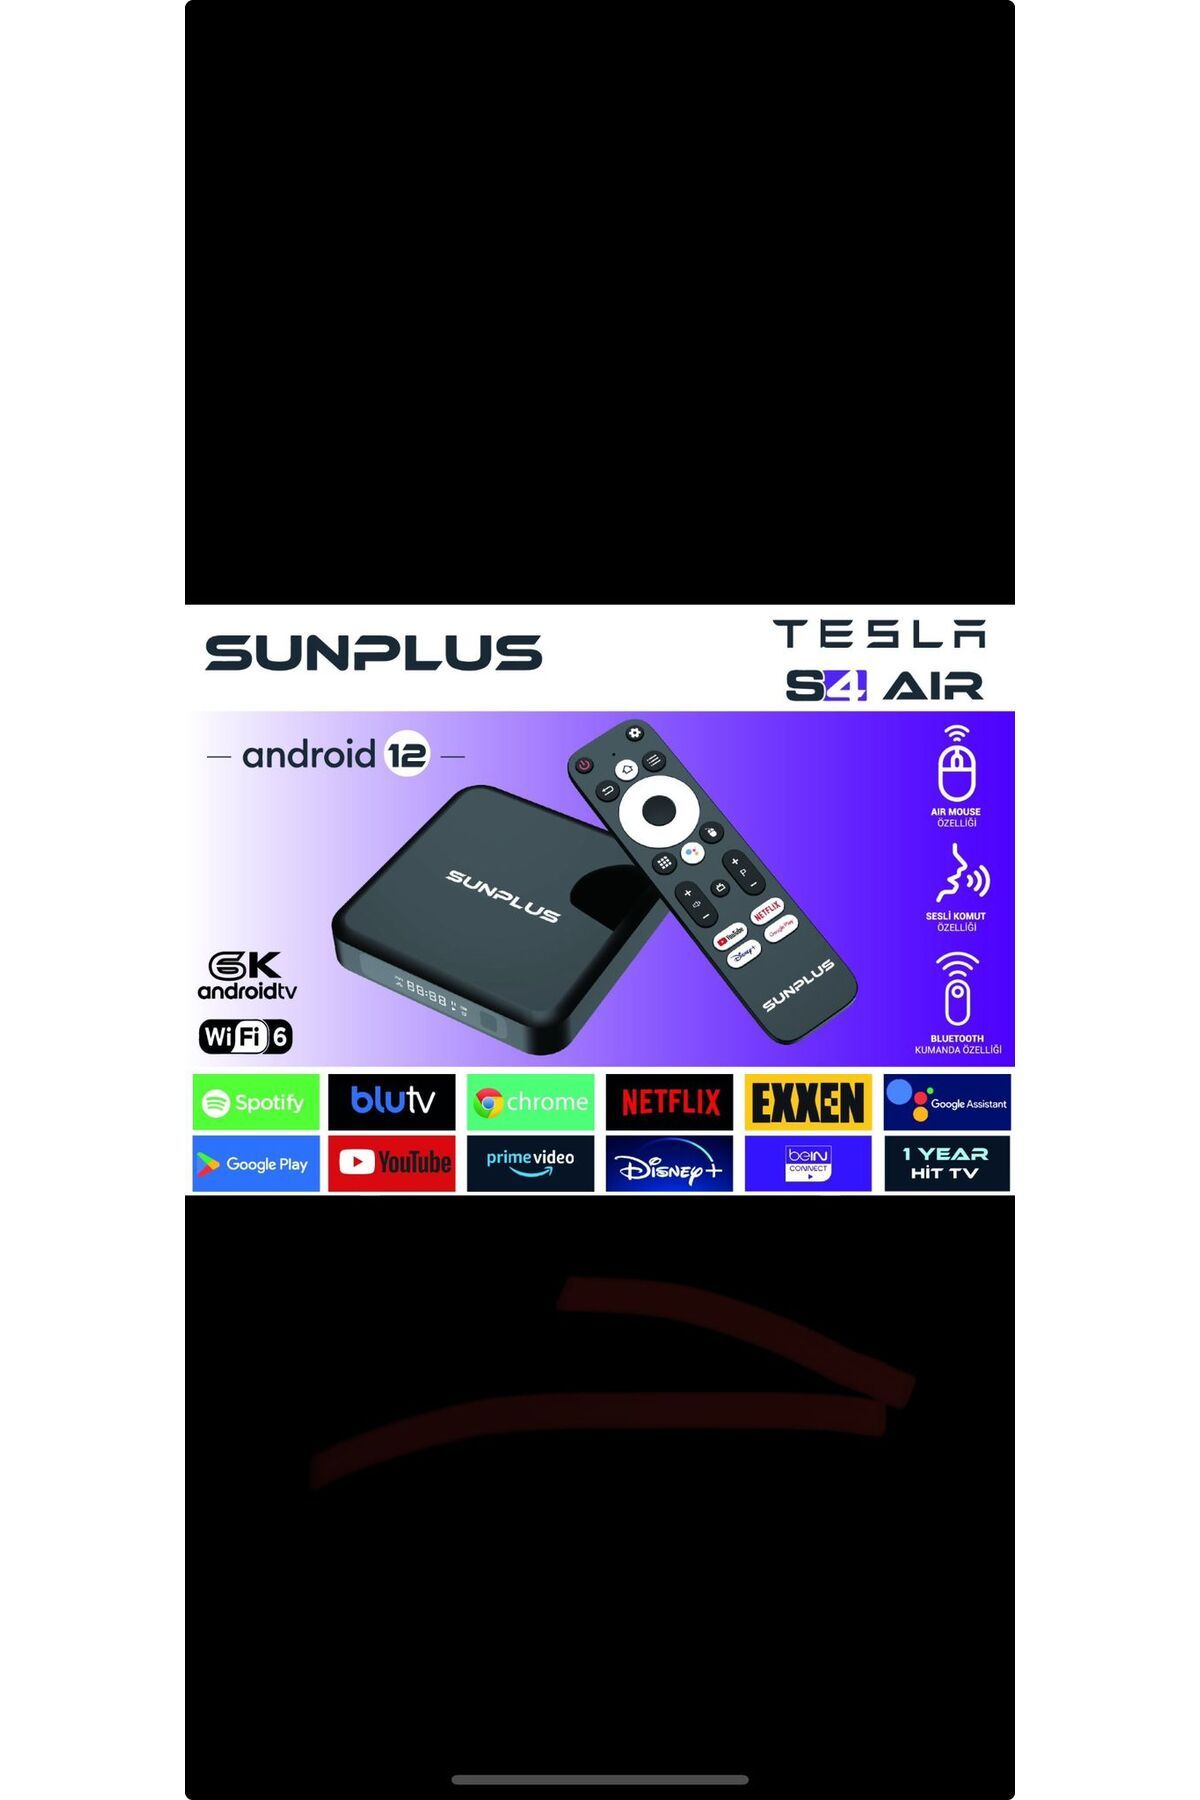 Sunplus Tesla S4 AIR android 12